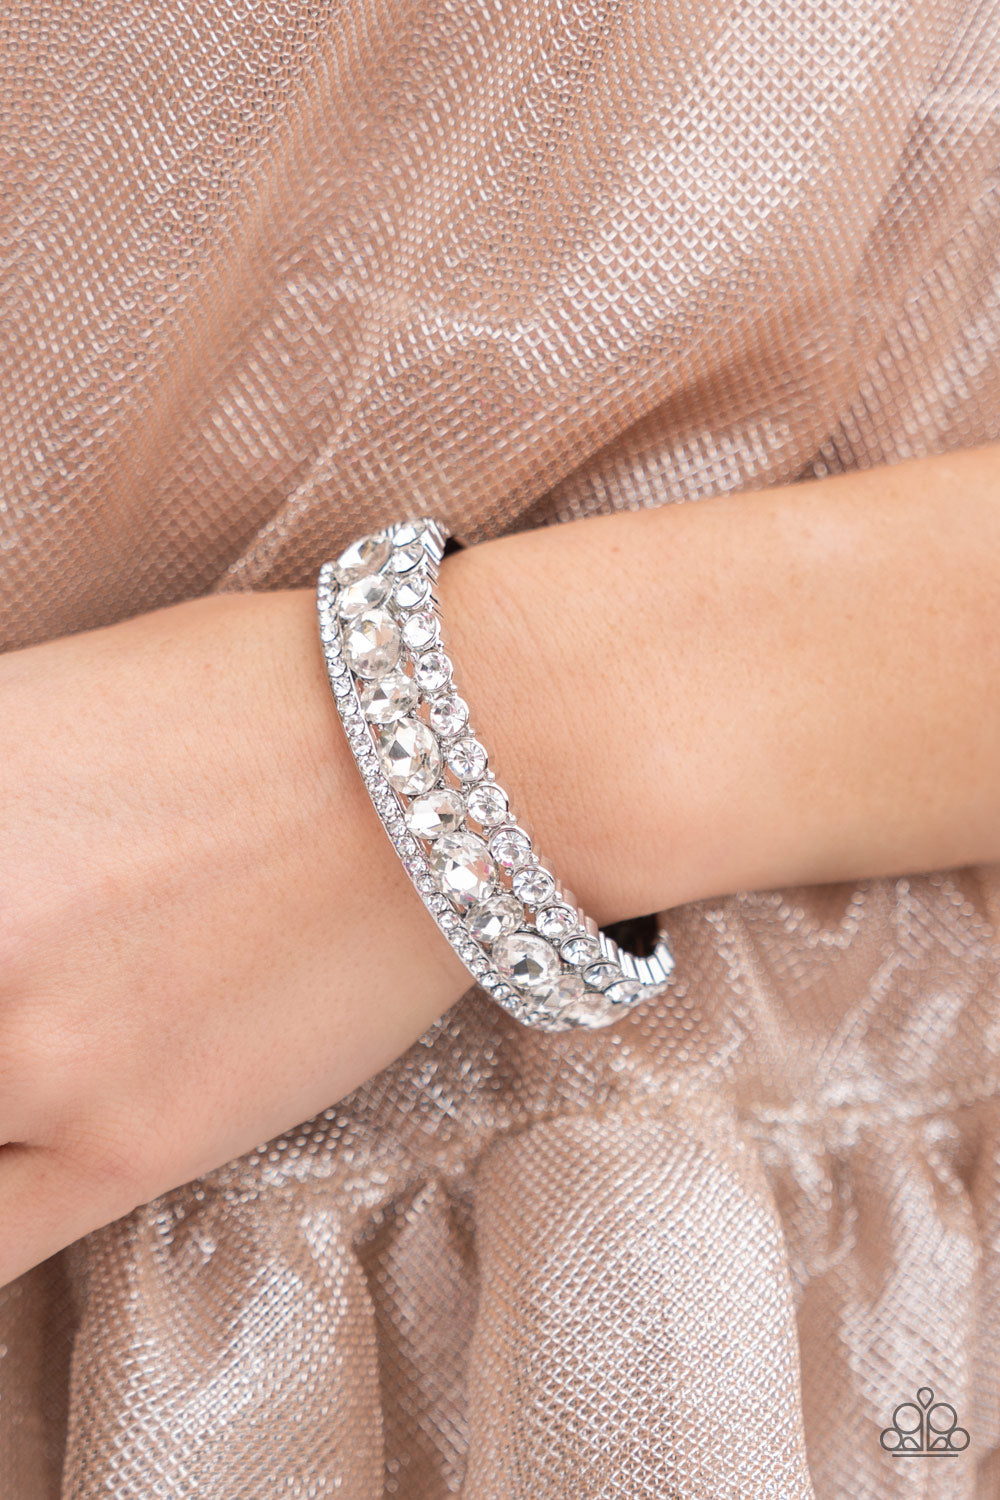 Mega Megawatt White Bracelet - Paparazzi Accessories  Three blinding rows of mismatched white rhinestones dramatically stack across the wrist, coalescing into a majestic bangle-like centerpiece. Features a hinged closure.  Sold as one individual bracelet.